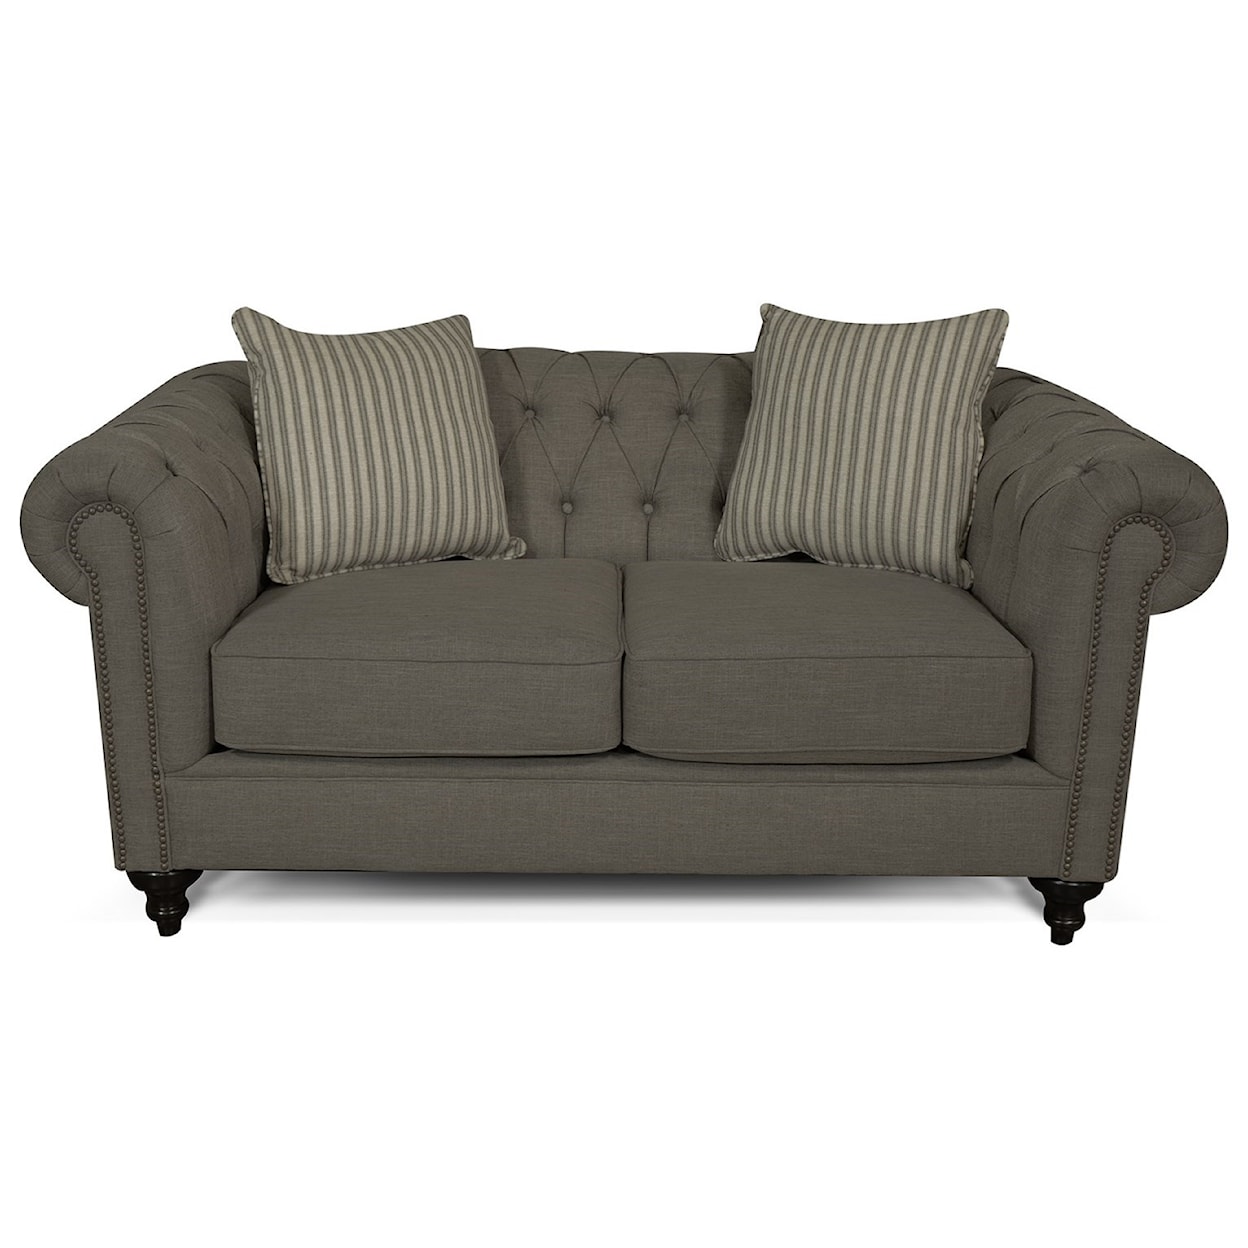 Dimensions Ruby 4H00 Loveseat with Button Tufted Back